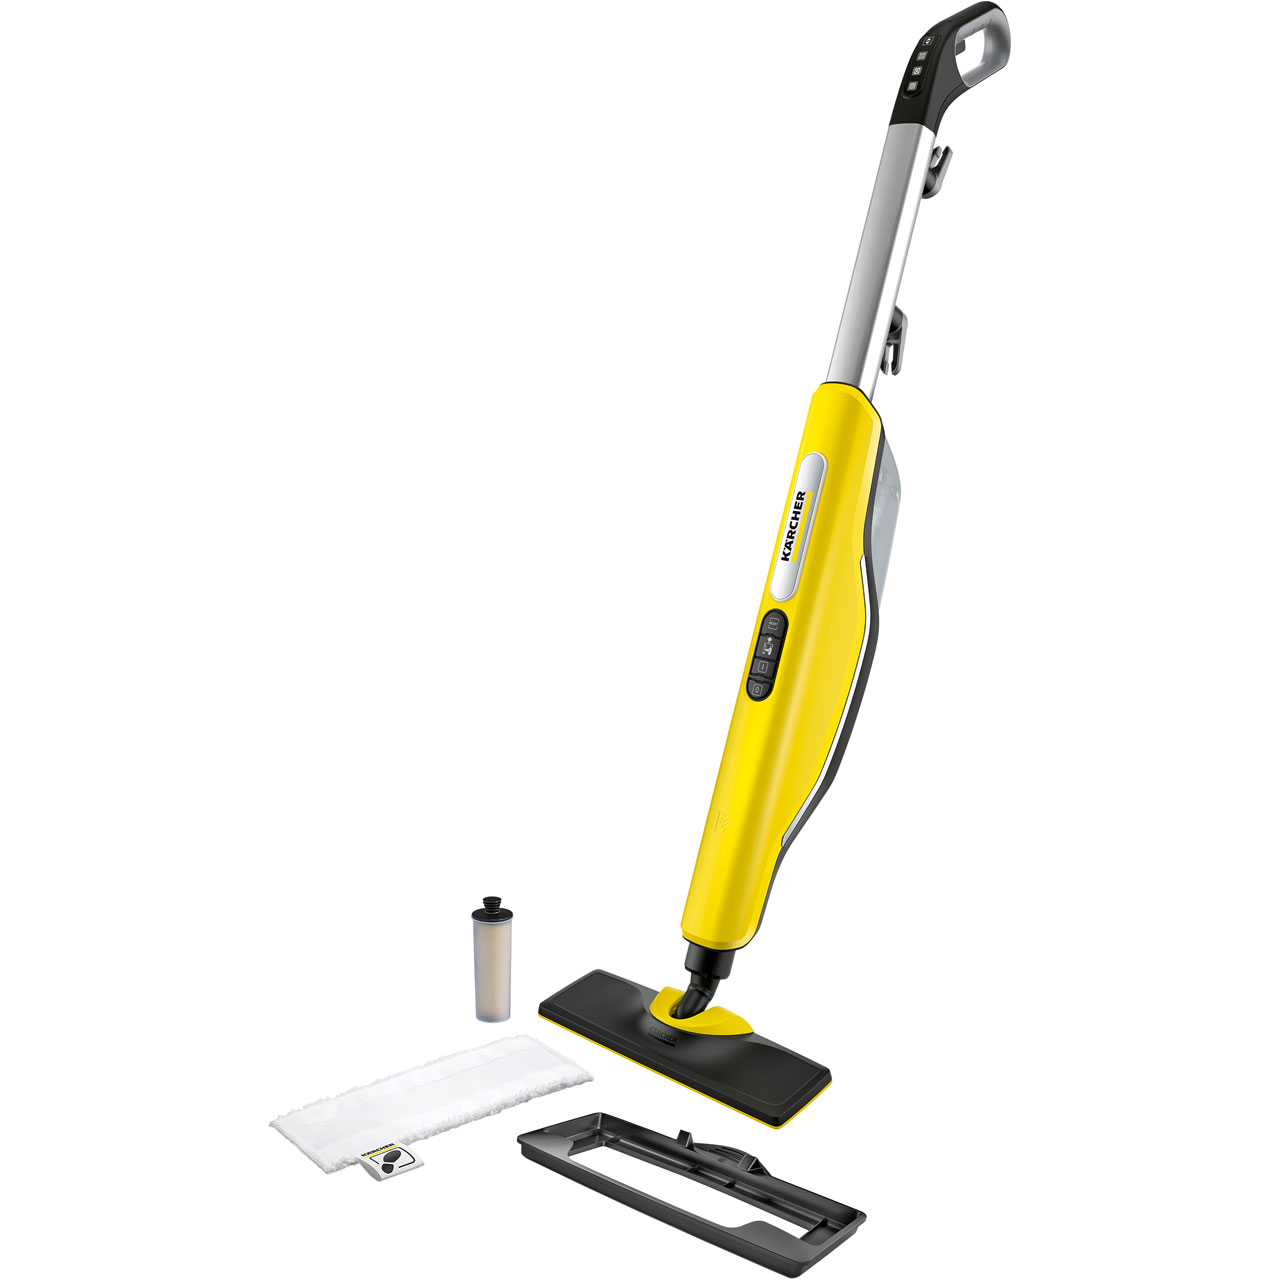 Karcher SC3UprightEasyFix Steam Mop with up to 15 Minutes Run Time Review